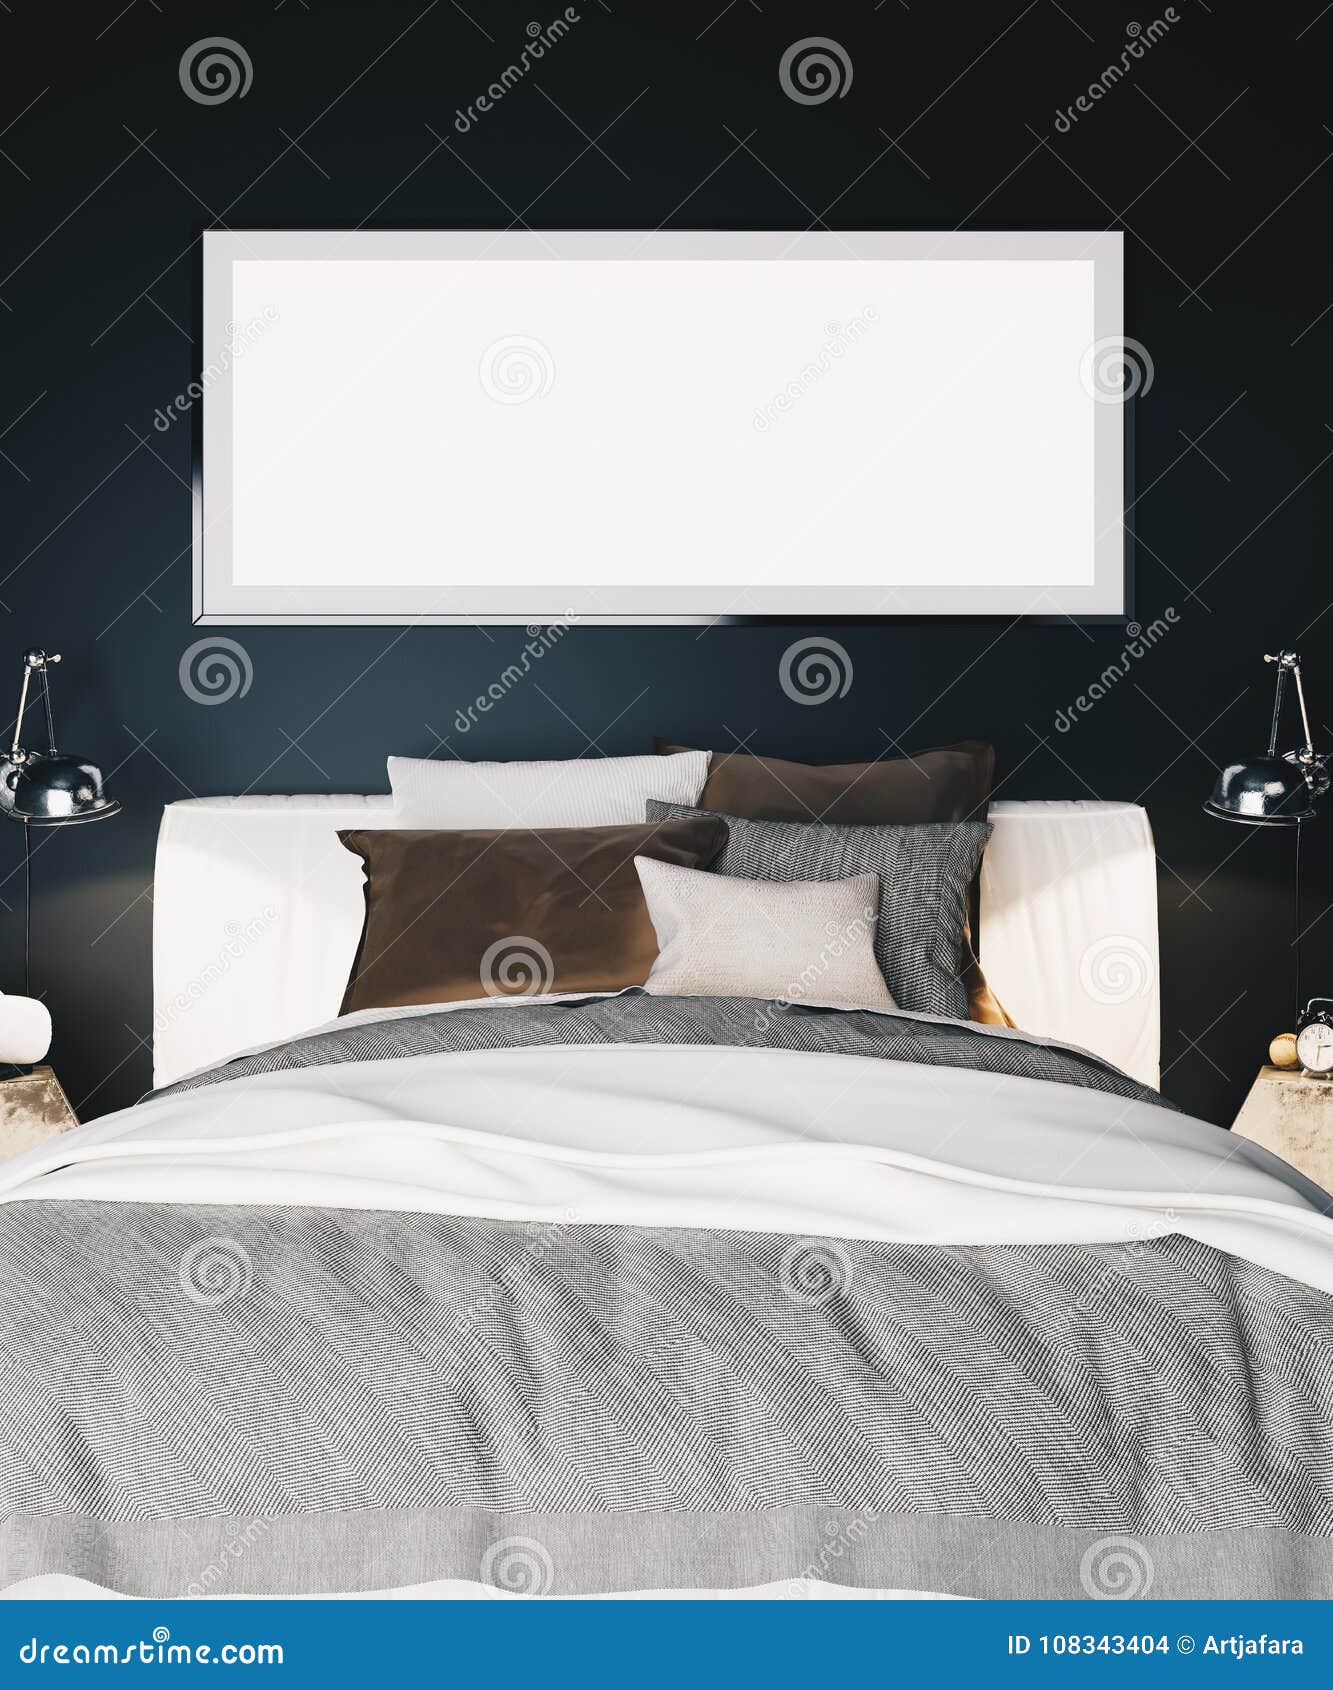 Interior Of A Modern Luxury Bedroom With Black Walls Bed